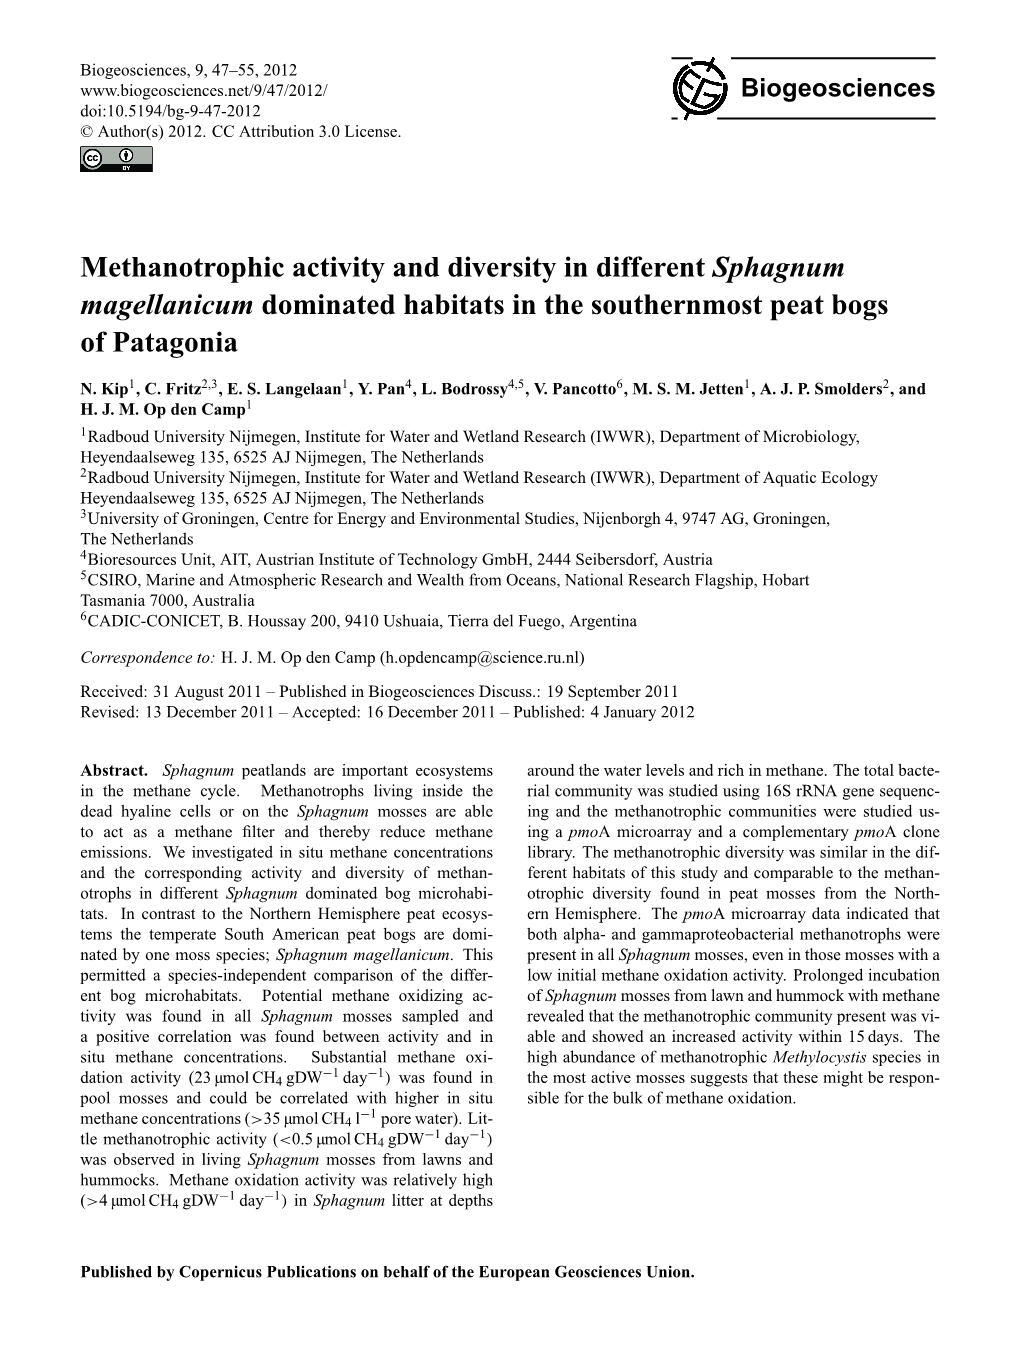 Methanotrophic Activity and Diversity in Different Sphagnum Magellanicum Dominated Habitats in the Southernmost Peat Bogs of Patagonia